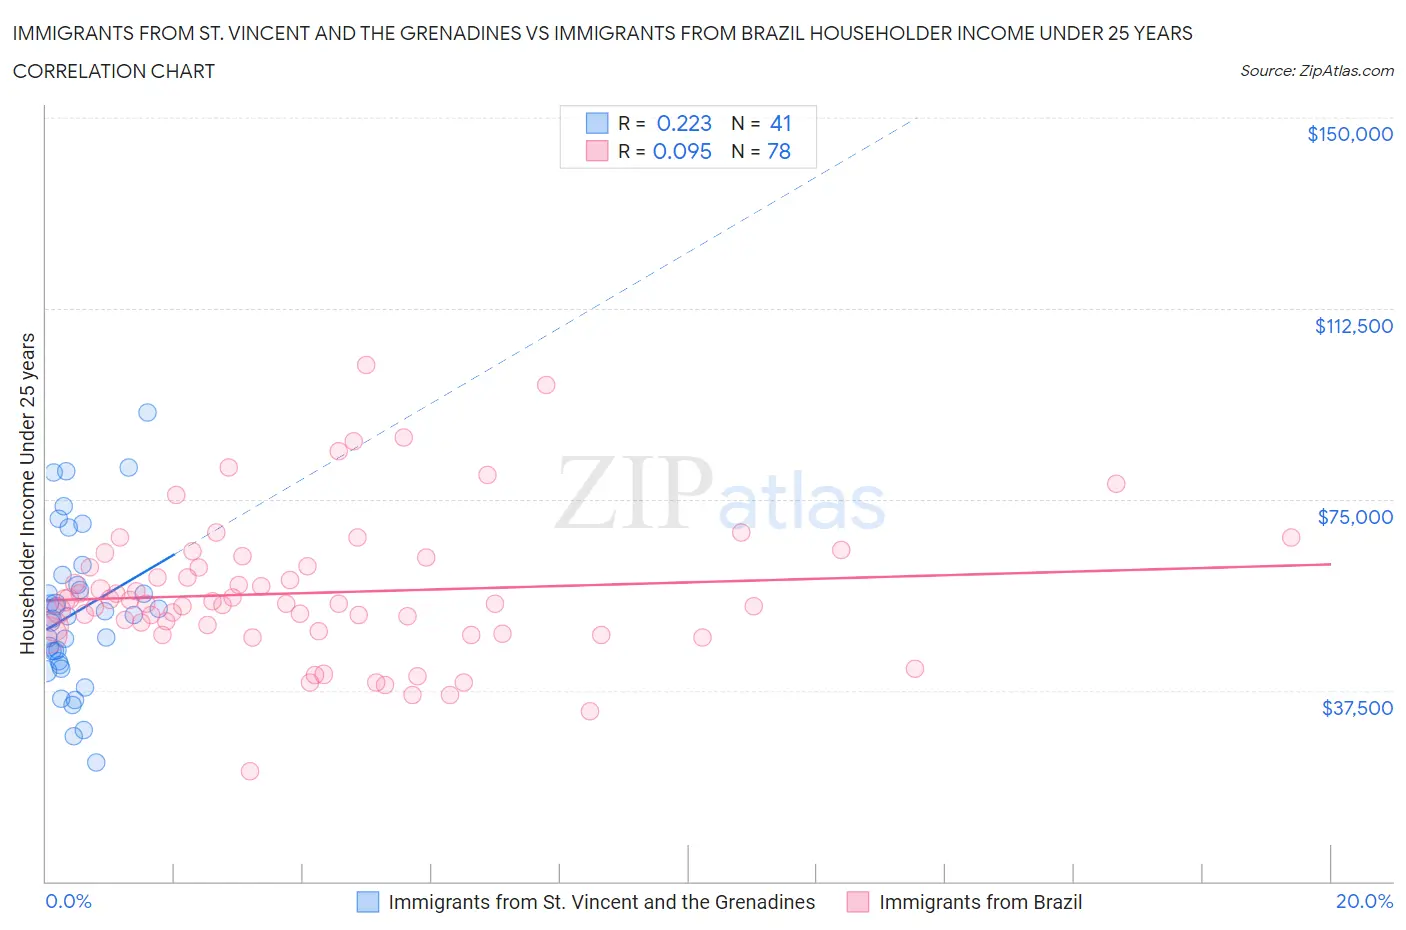 Immigrants from St. Vincent and the Grenadines vs Immigrants from Brazil Householder Income Under 25 years